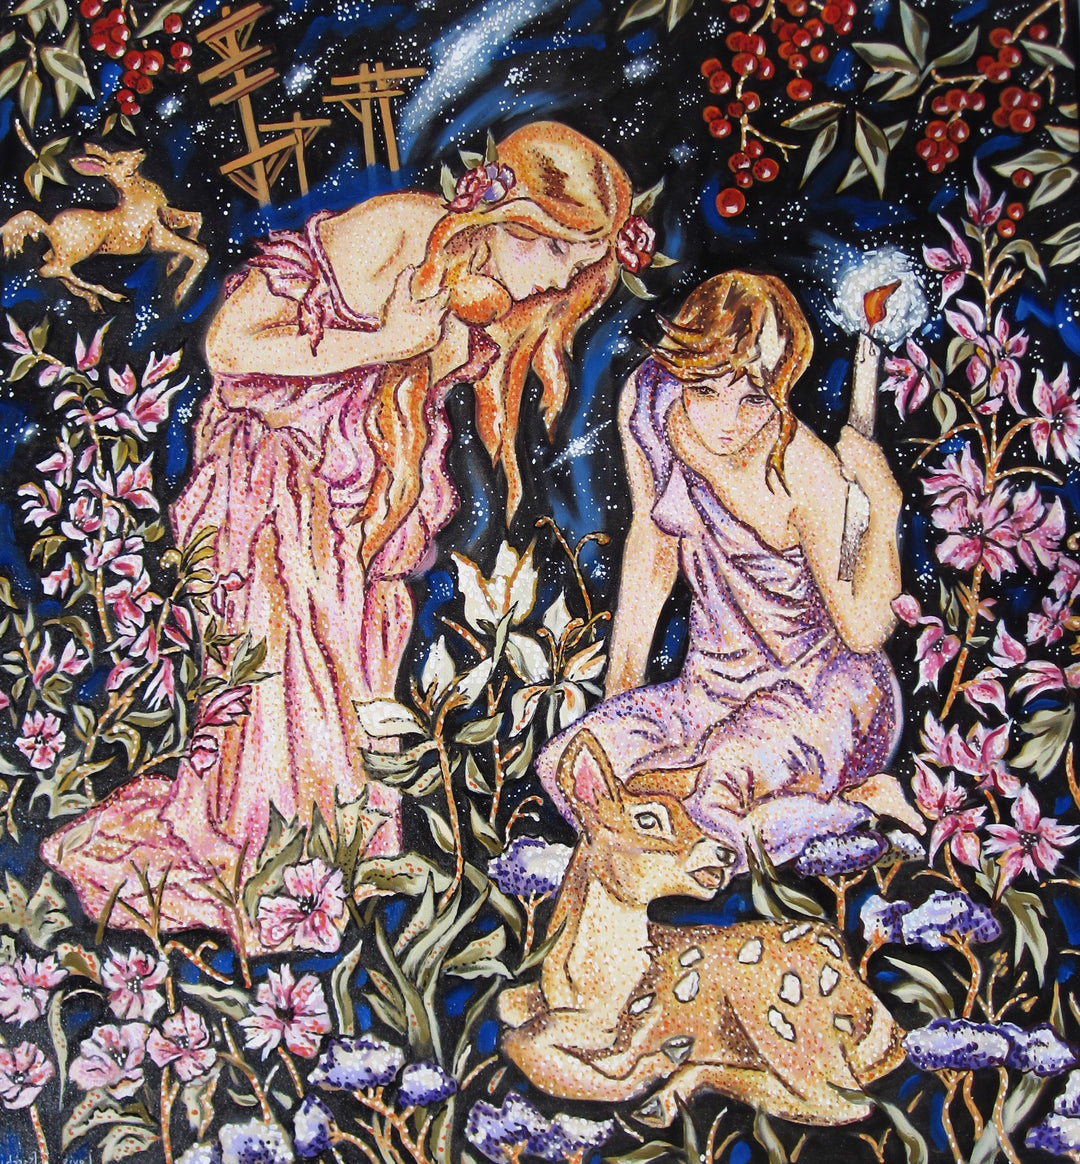 A mesmerizing Louis Recchia - "We are Star-Stuff" painting of two girls and a deer in a flourishing garden.